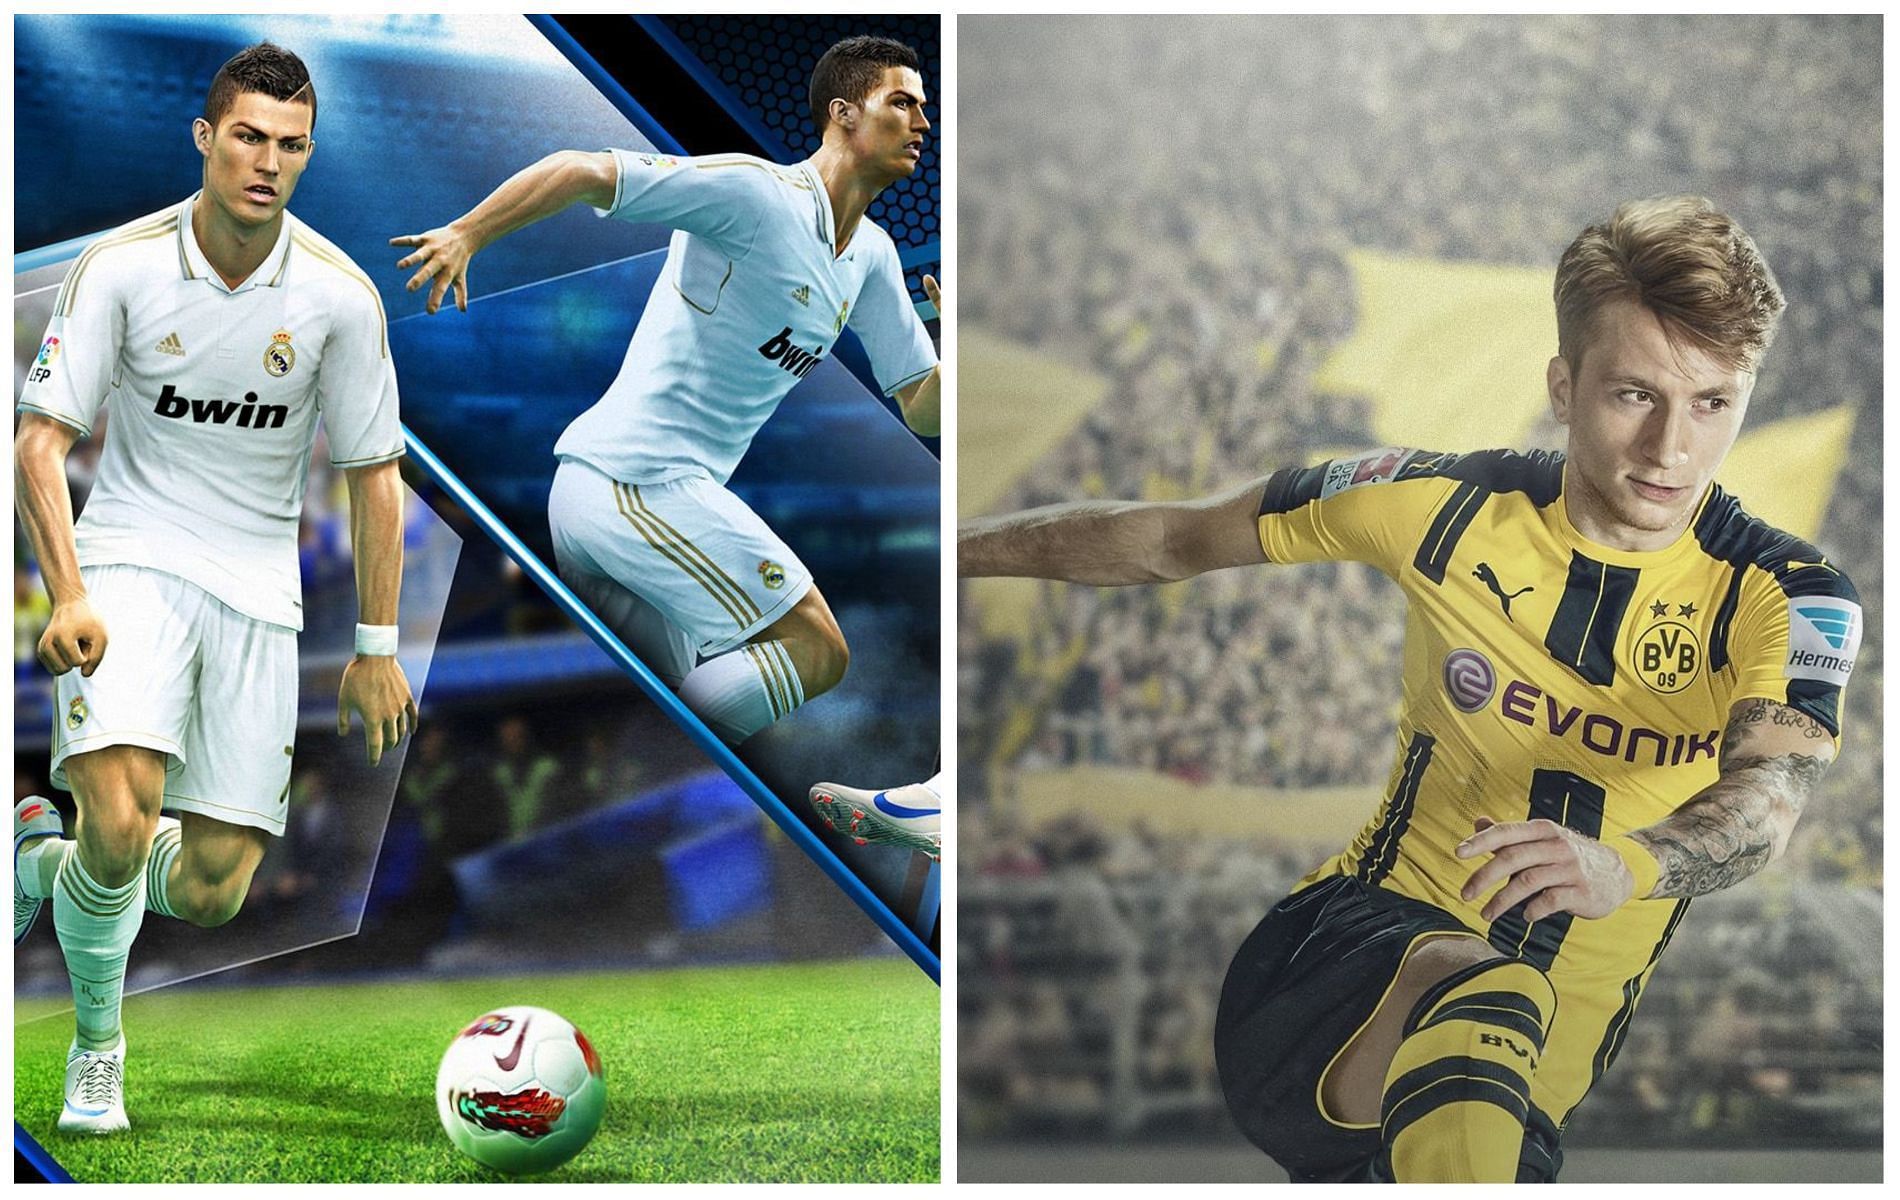 Football simulators are some of the most successful video games in the market (Images via Konami and EA Sports)